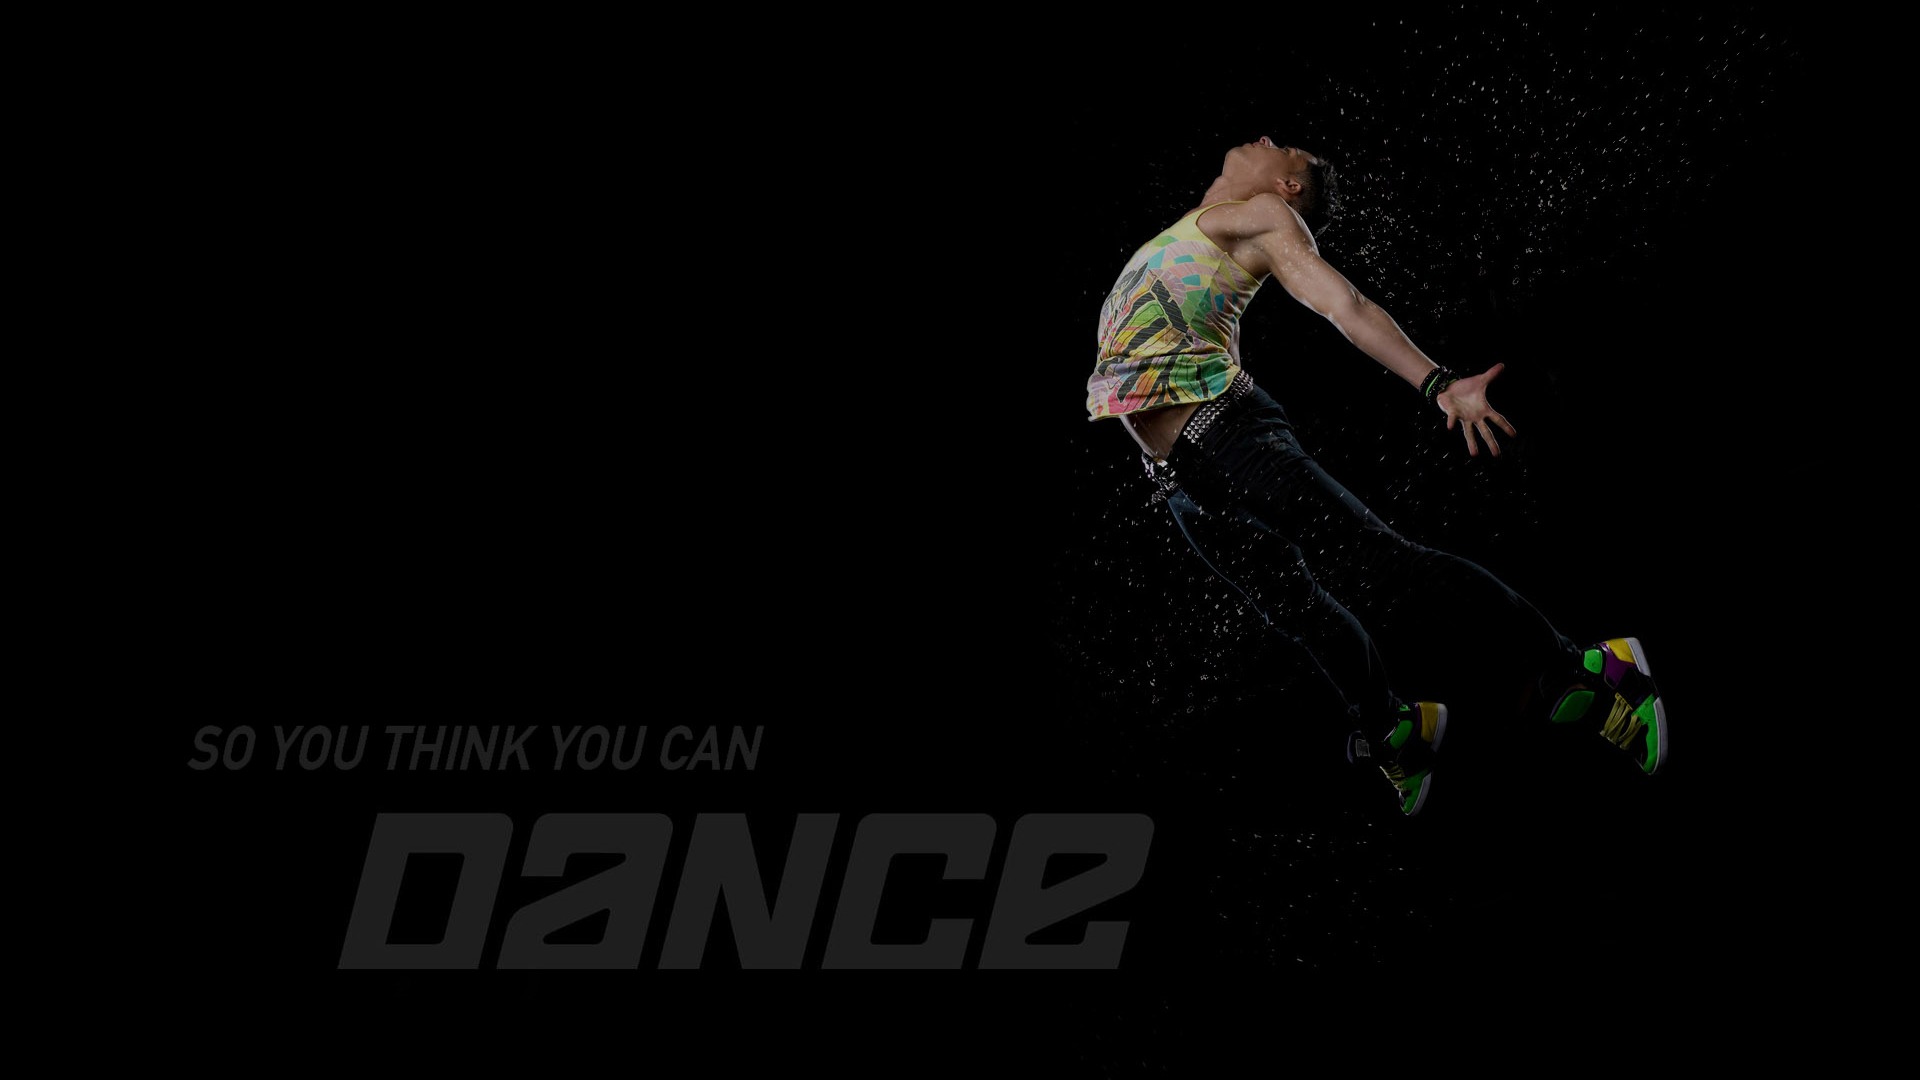 So You Think You Can Dance wallpaper (2) #6 - 1920x1080